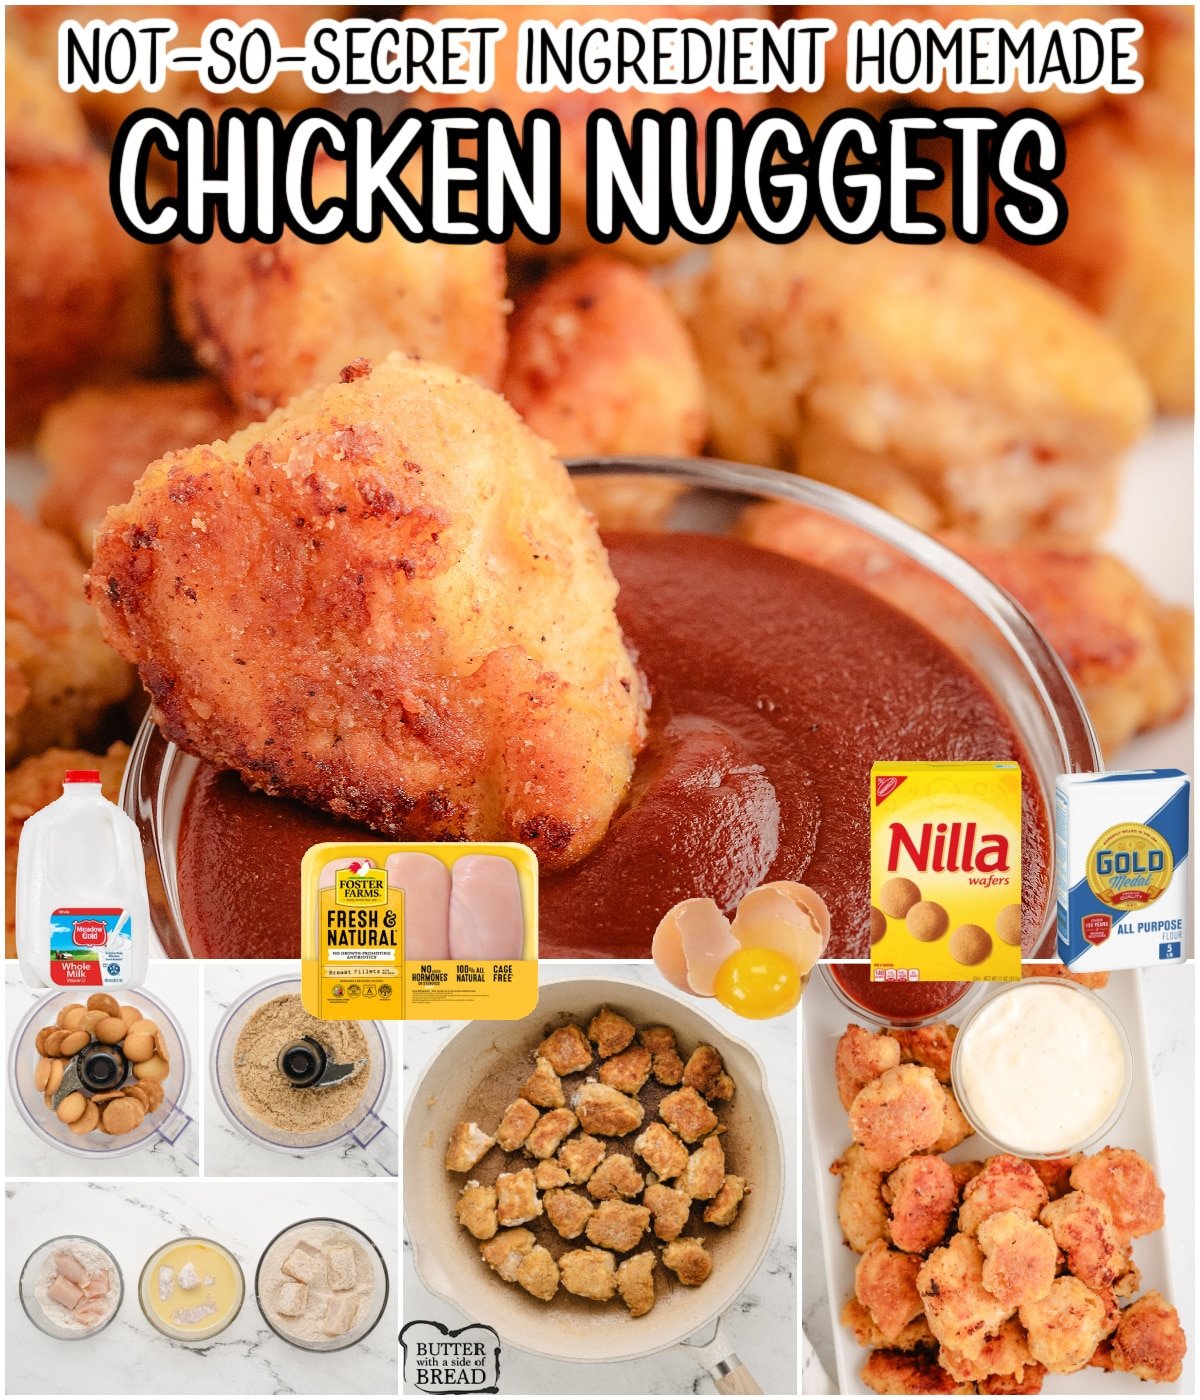 Homemade Chicken Nuggets with simple ingredients that your family won't be able to get enough of! Juicy nuggets made with tender chicken & a unique breading that tastes incredible!